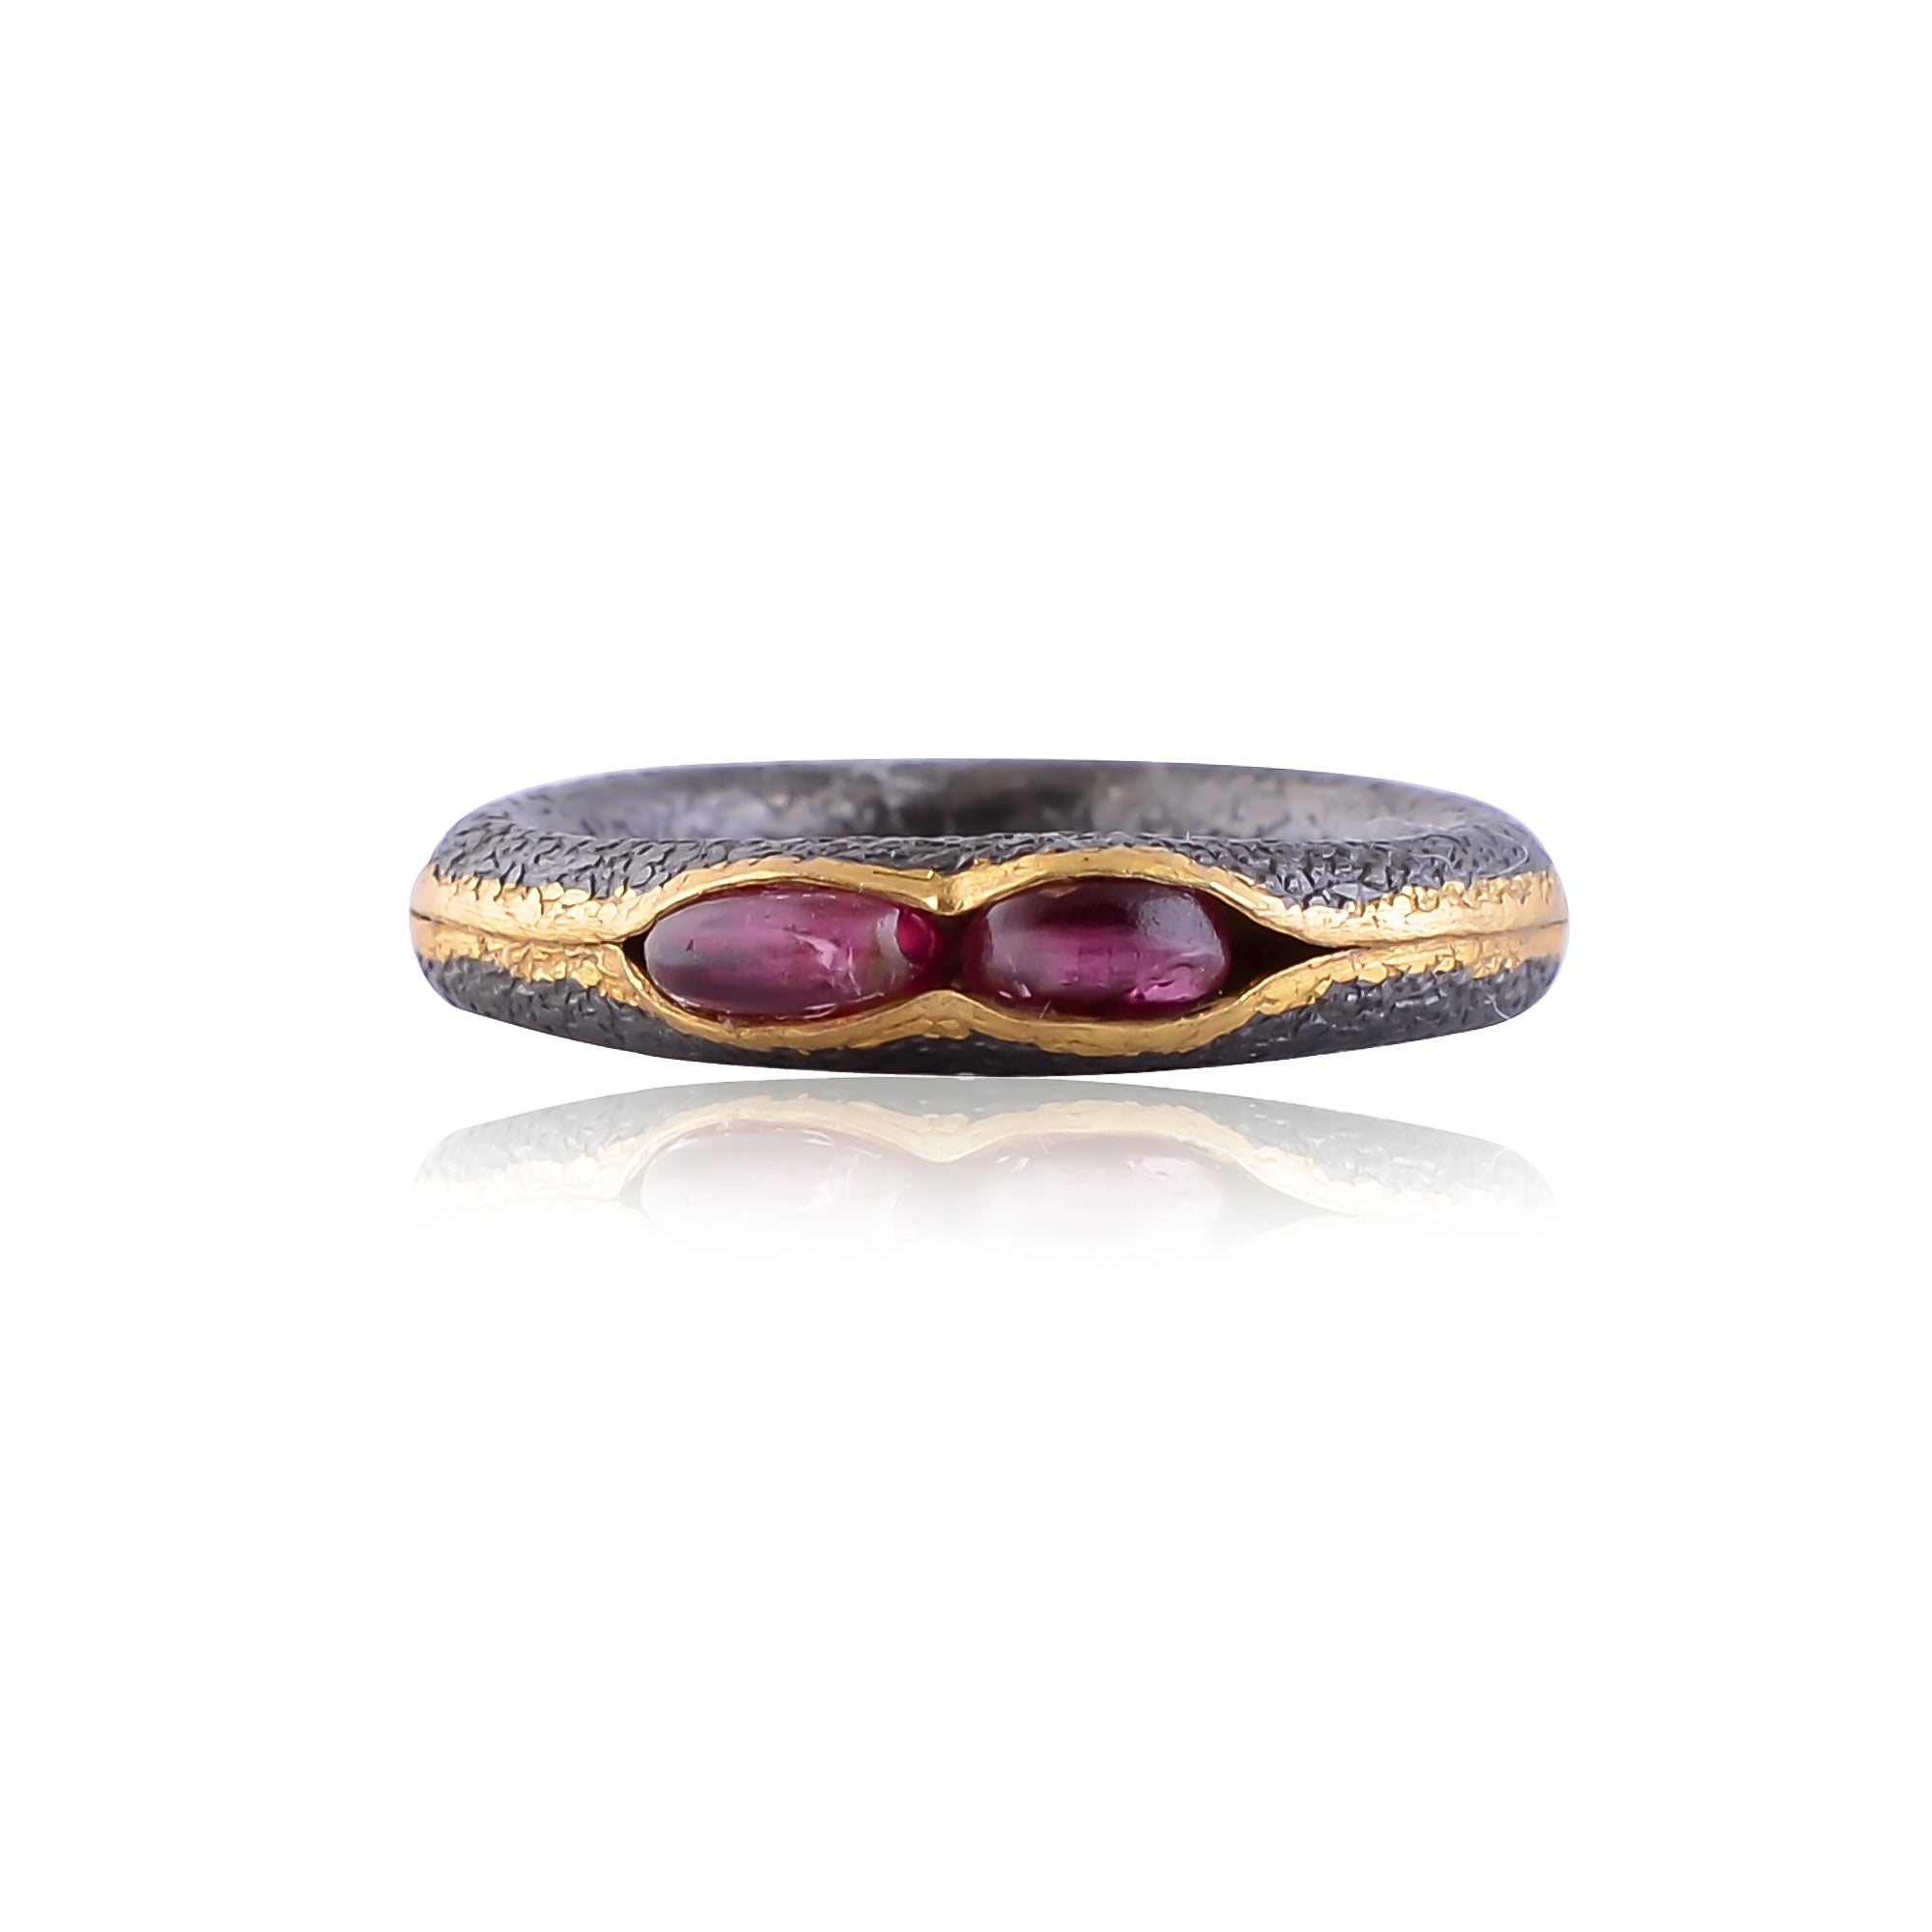 Buy Handmade Silver Gold Black Plated Pink Tourmaline Ring